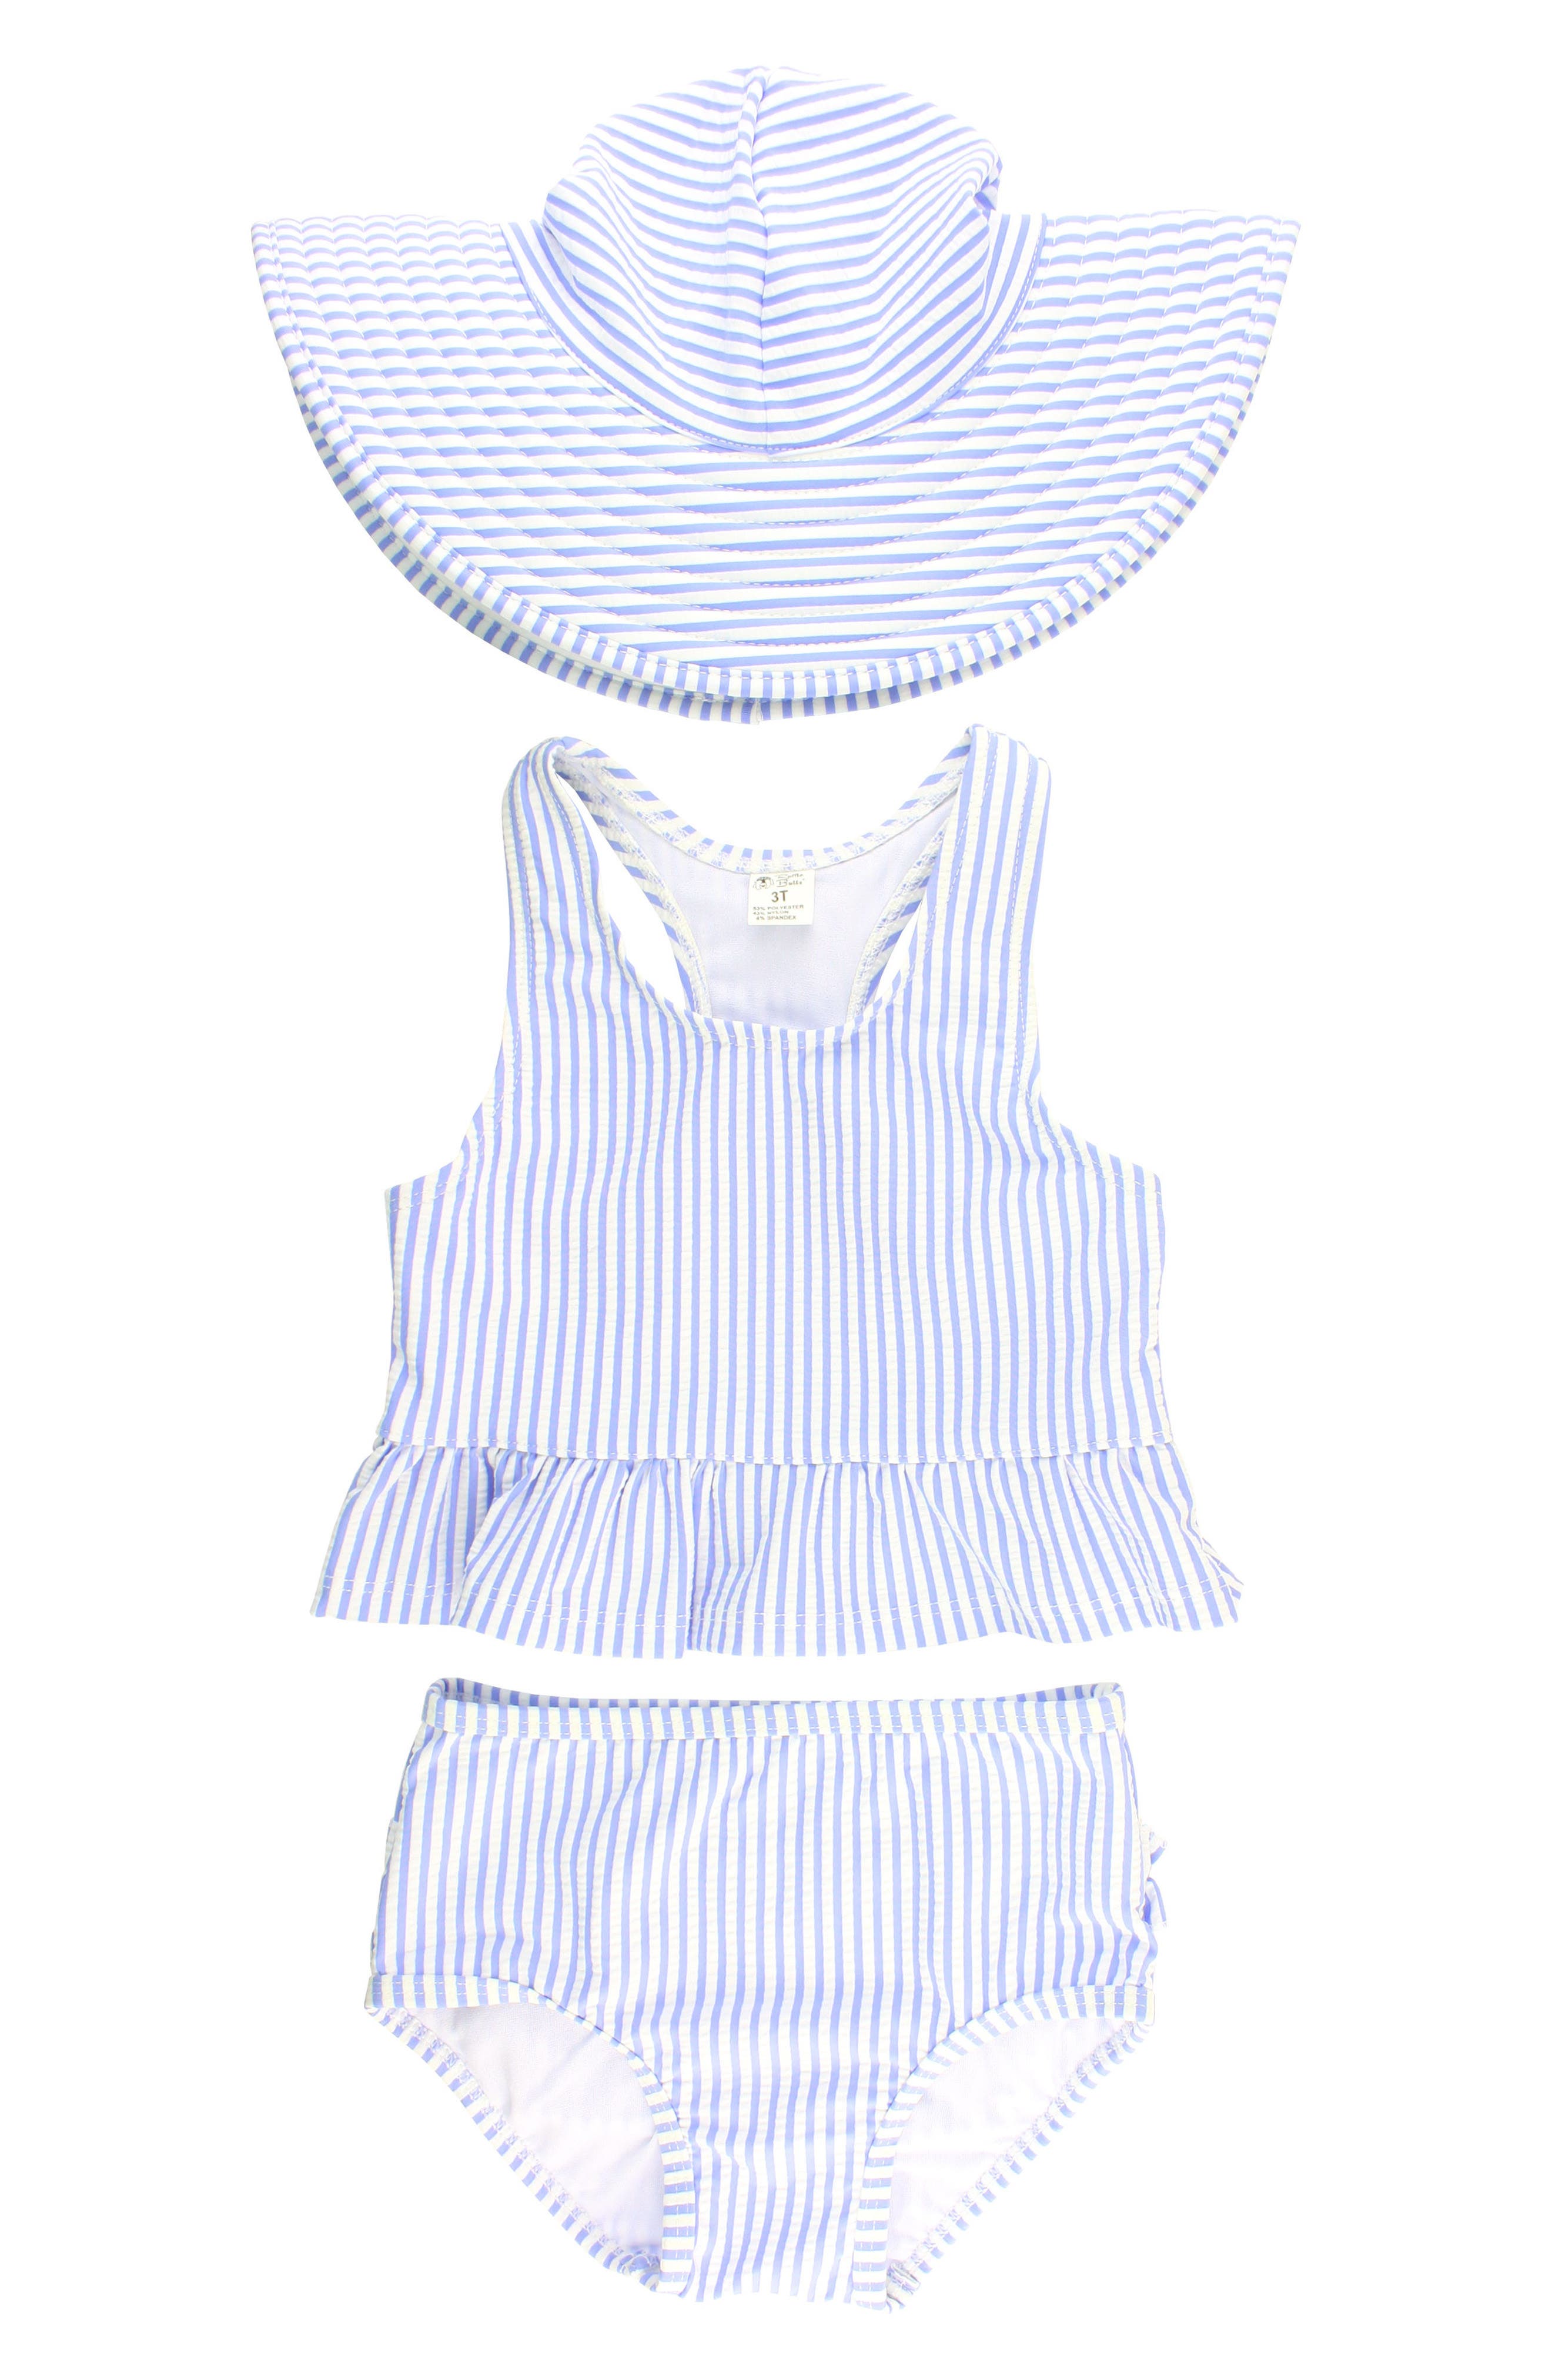 nordstrom baby bathing suits